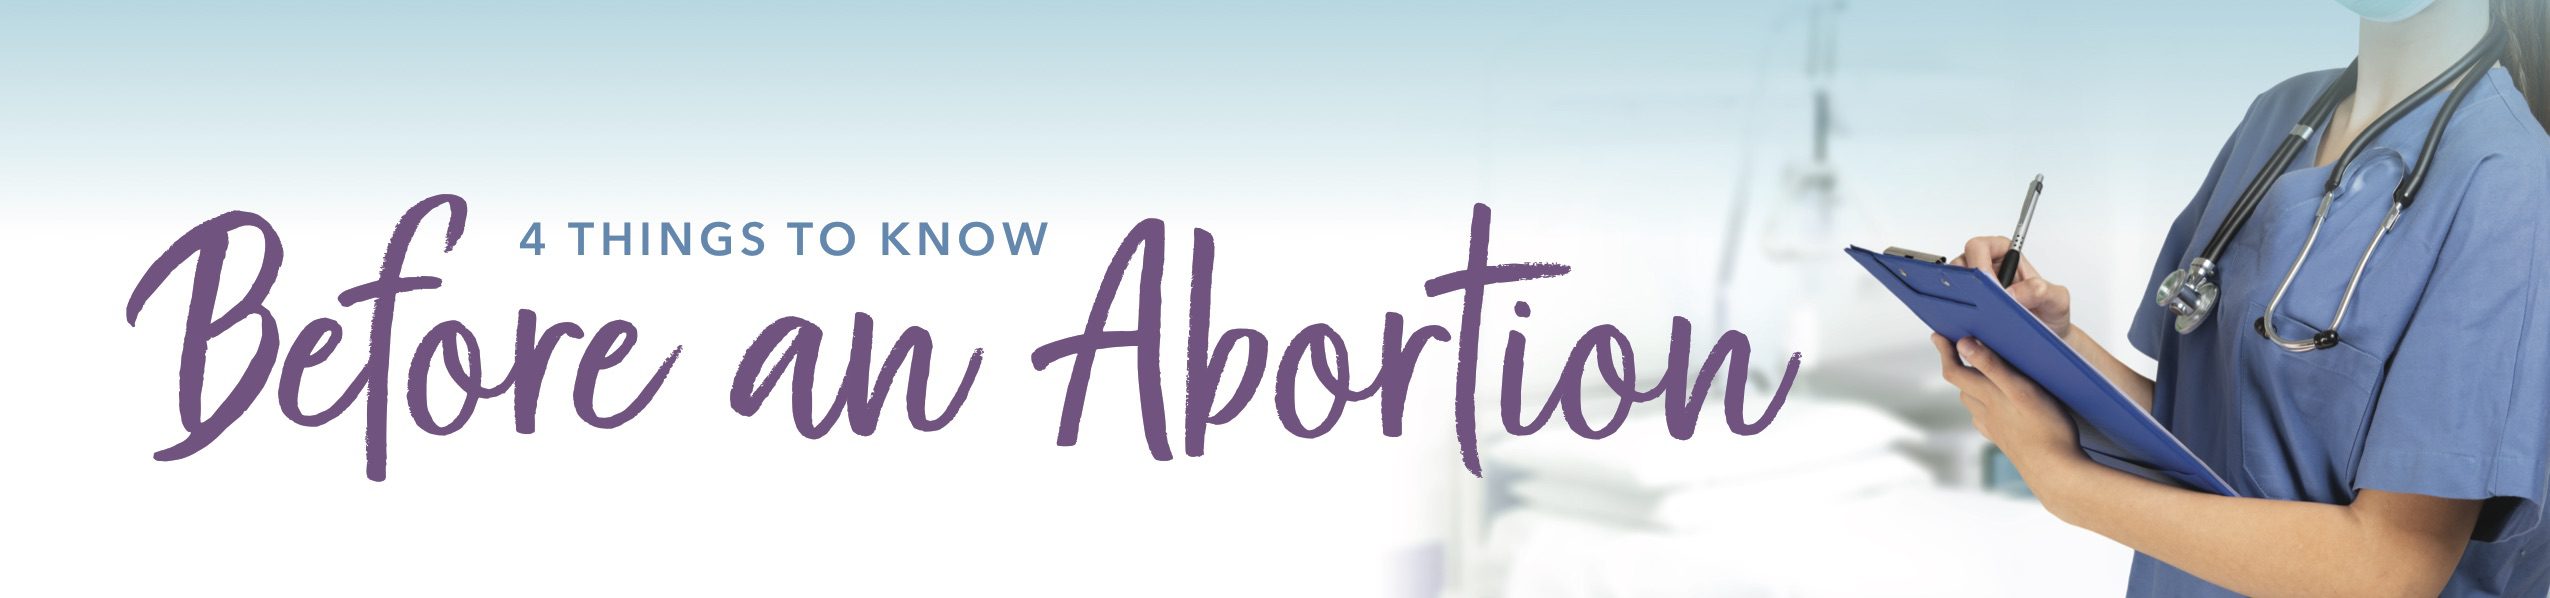 woman looking at things to know before an abortion